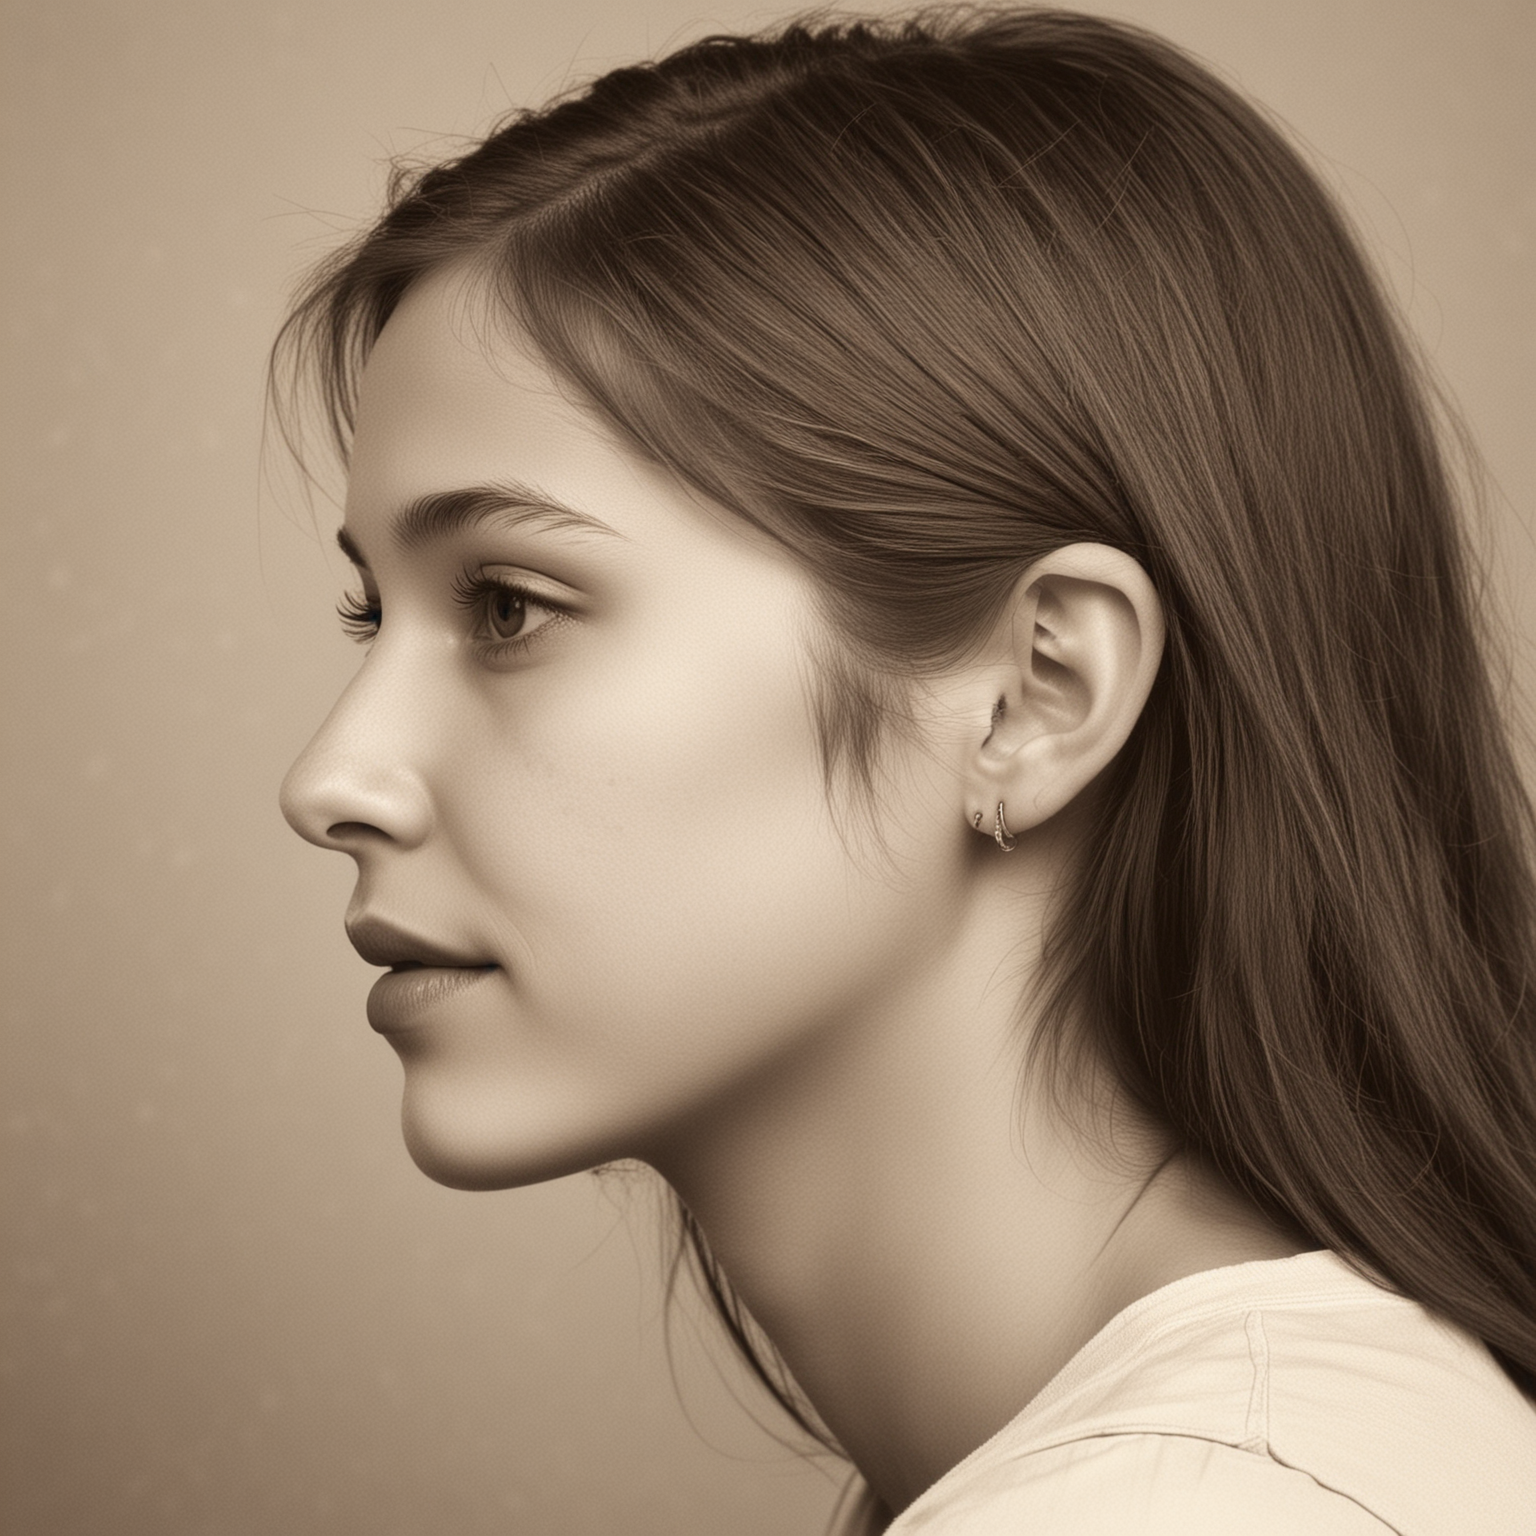 Portrait of a Teenage Girl in Sepia Profile